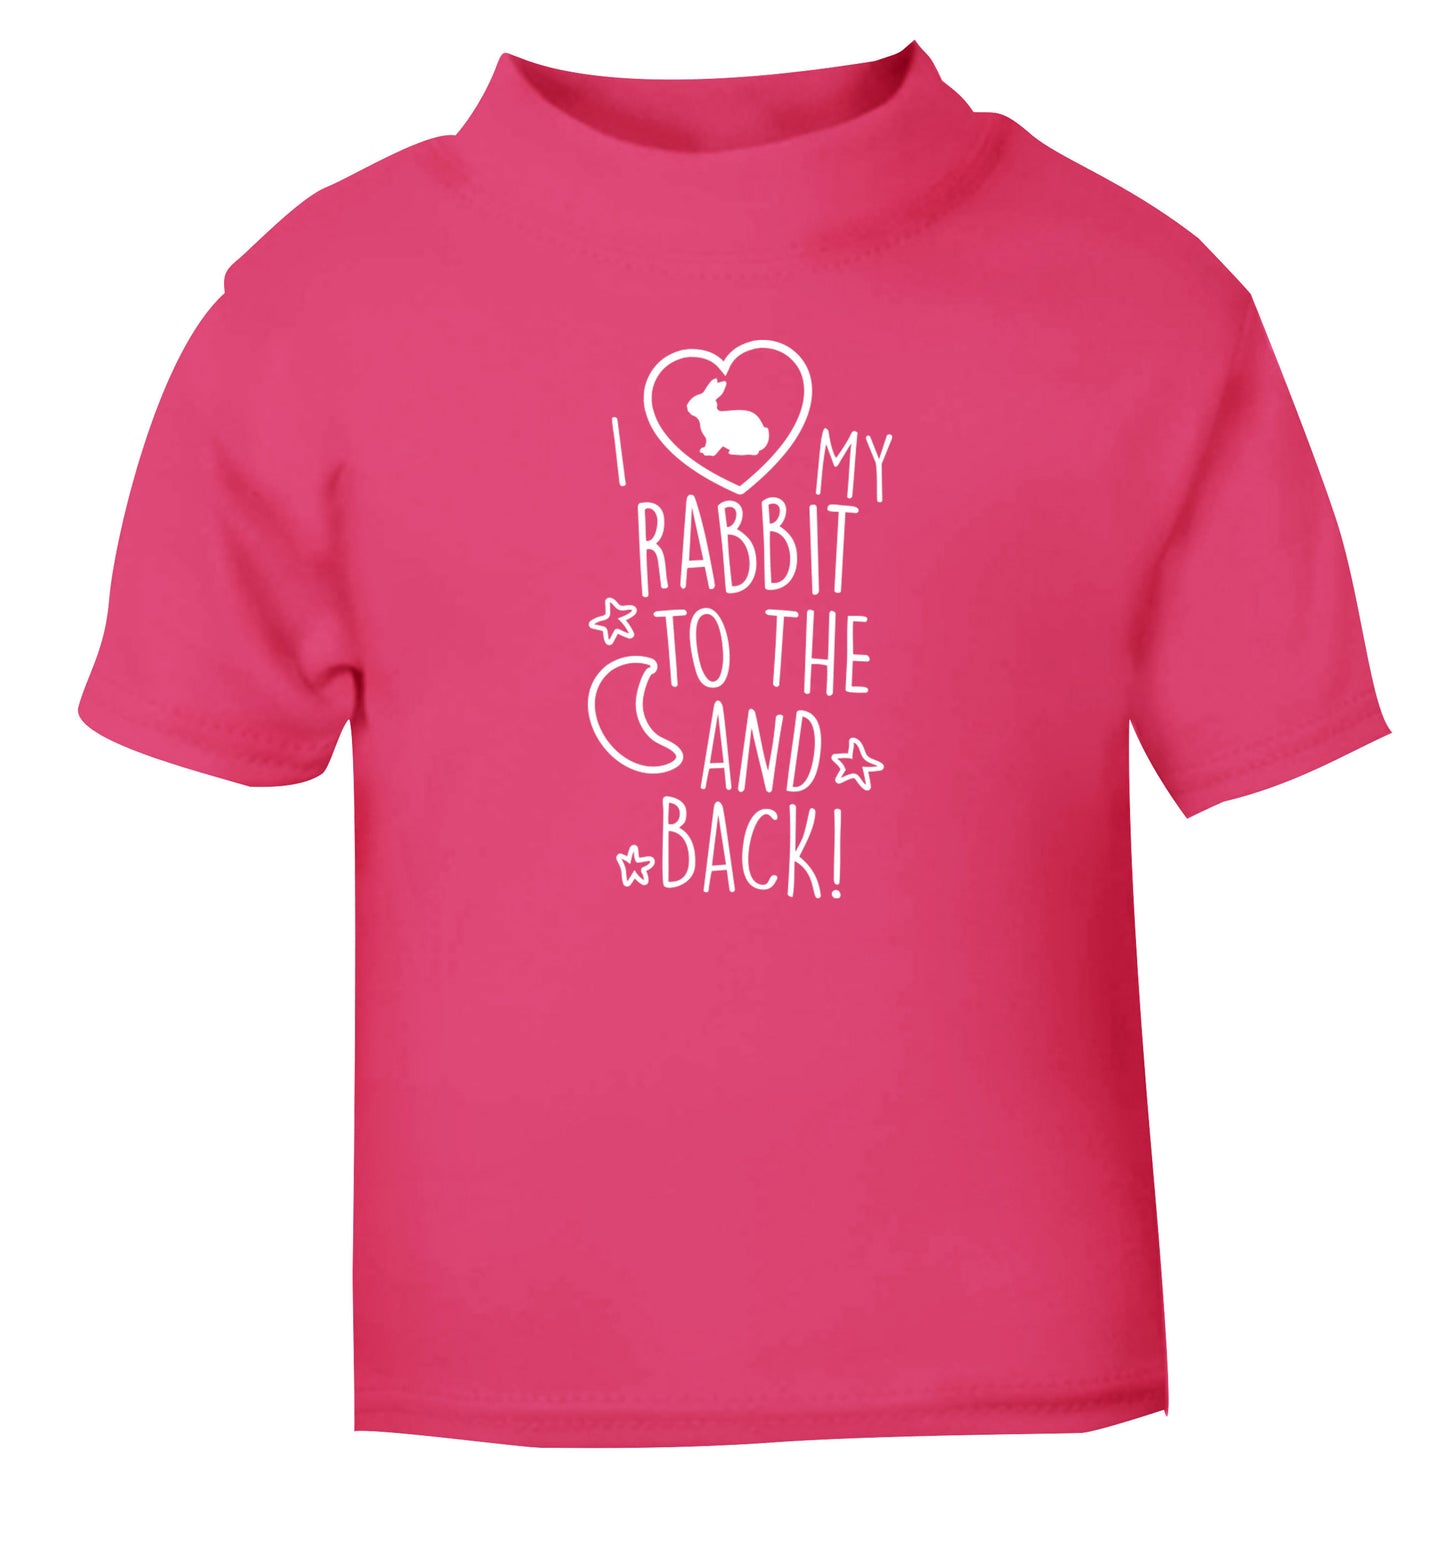 I love my rabbit to the moon and back pink Baby Toddler Tshirt 2 Years